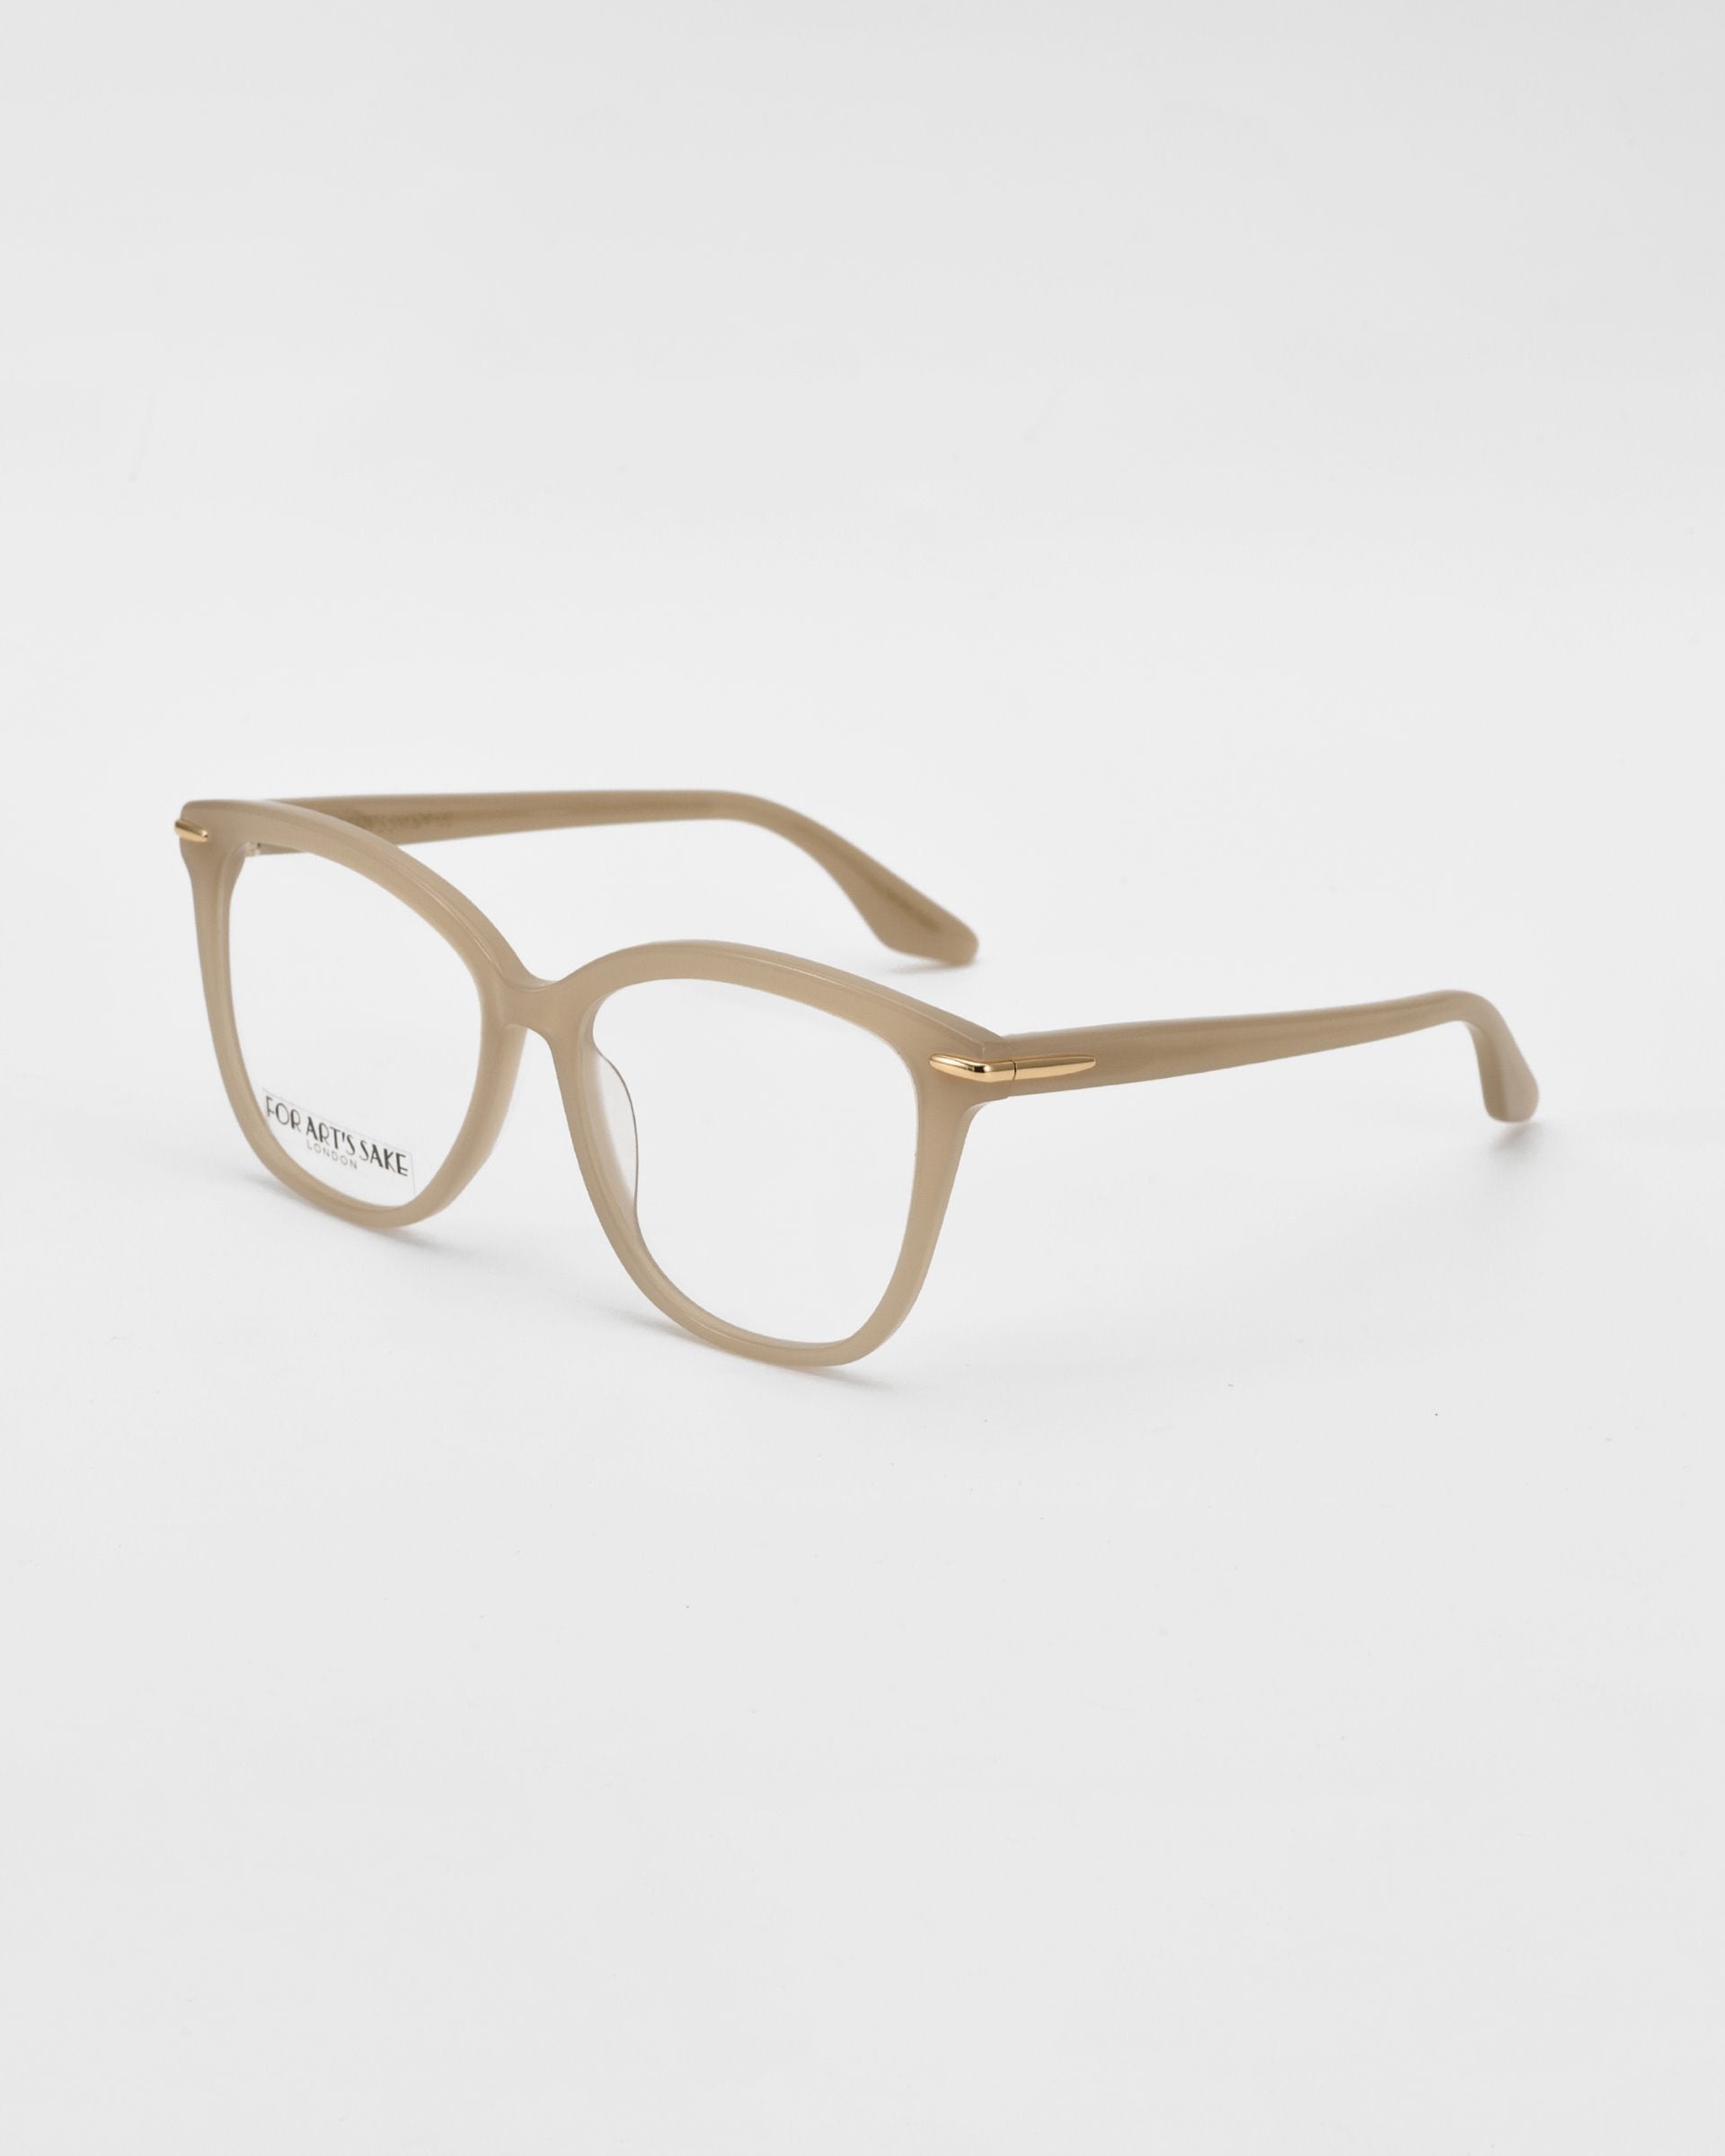 A pair of beige prescription eyeglasses with rectangular frames, crafted by For Art&#39;s Sake® Cadenza, and the text &quot;FOR ART&#39;S SAKE&quot; visible on the inside of the right lens, set against a plain white background.